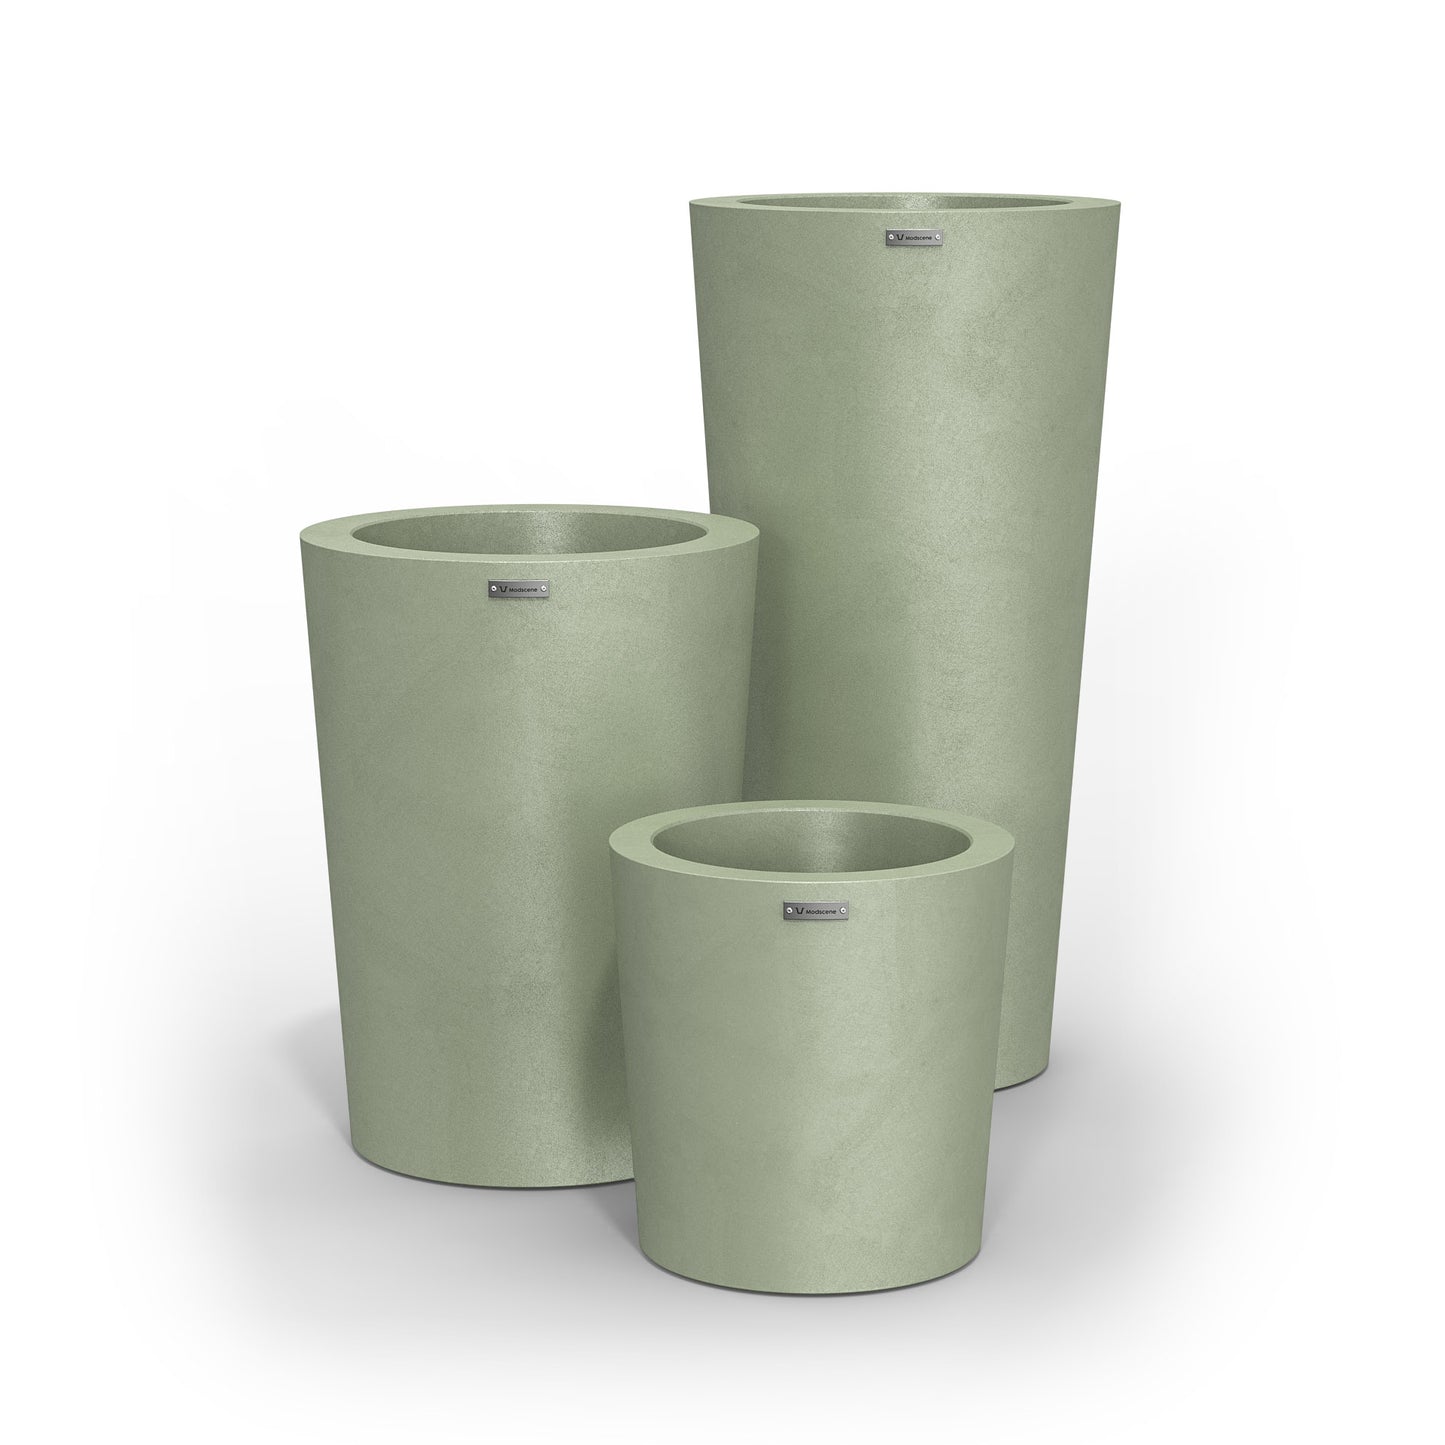 A cluster of three Modscene planter pots in a brushed green colour.